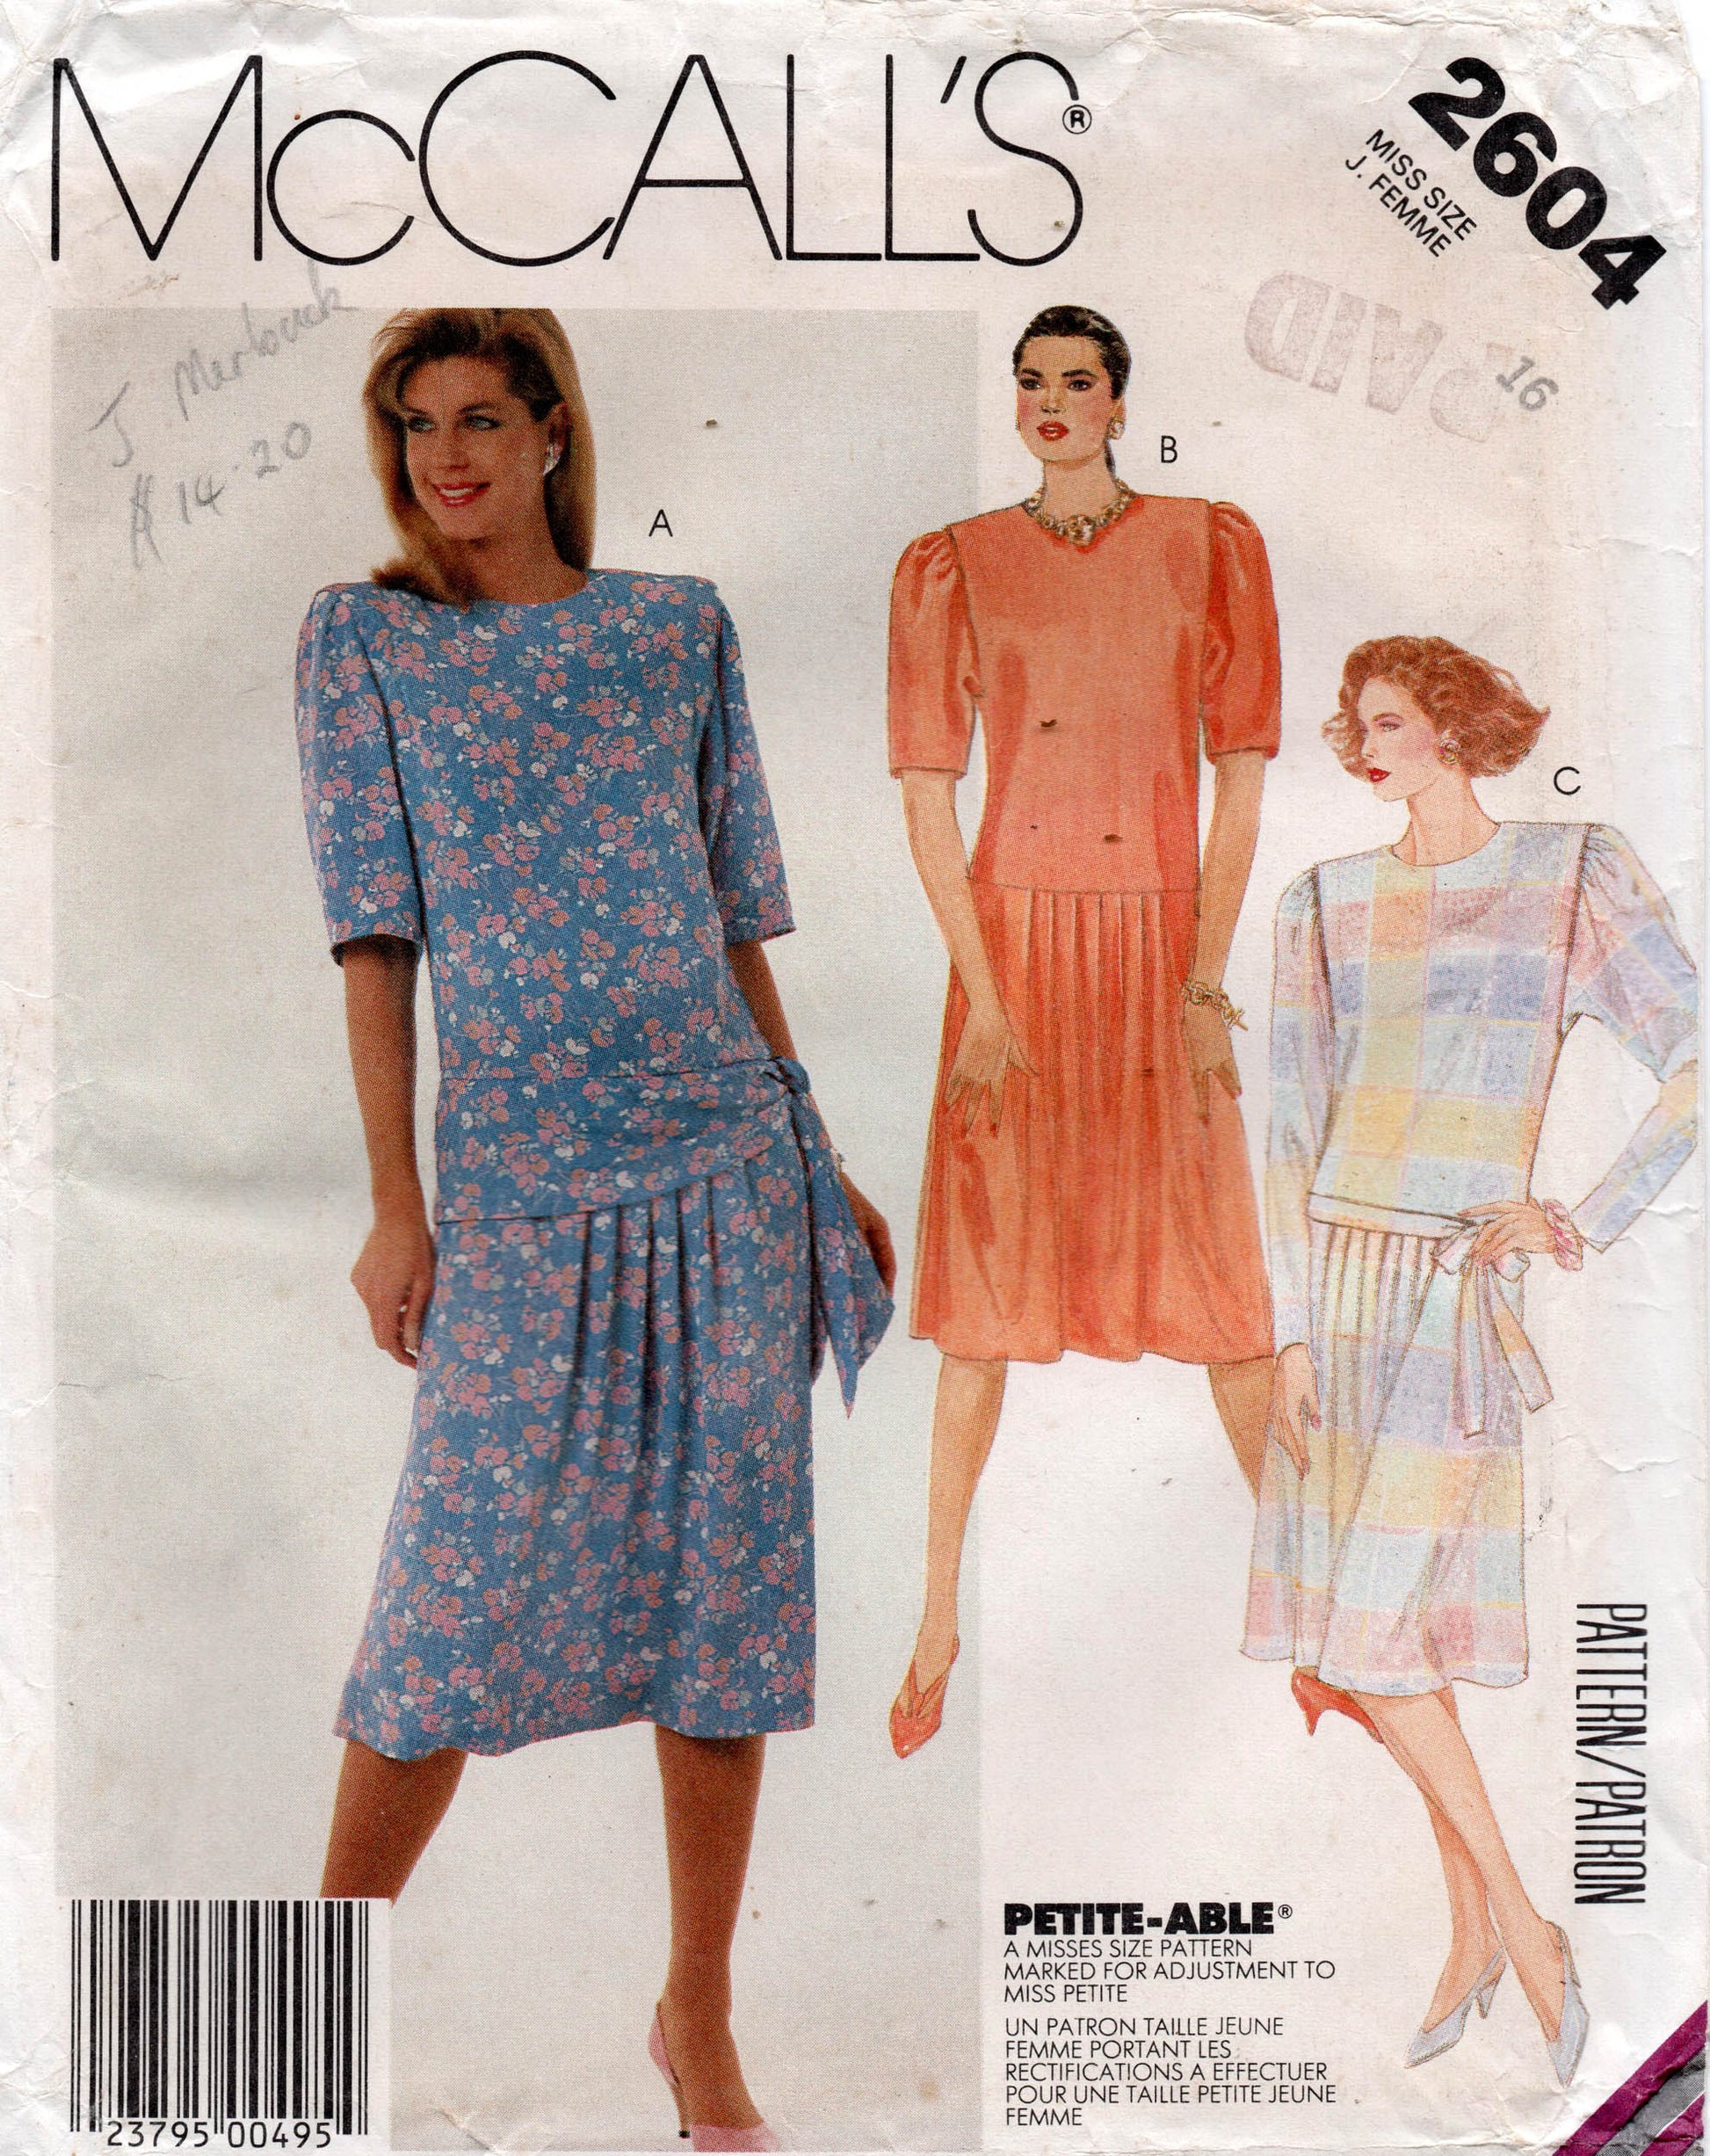 McCall's 2604 vintage sewing pattern